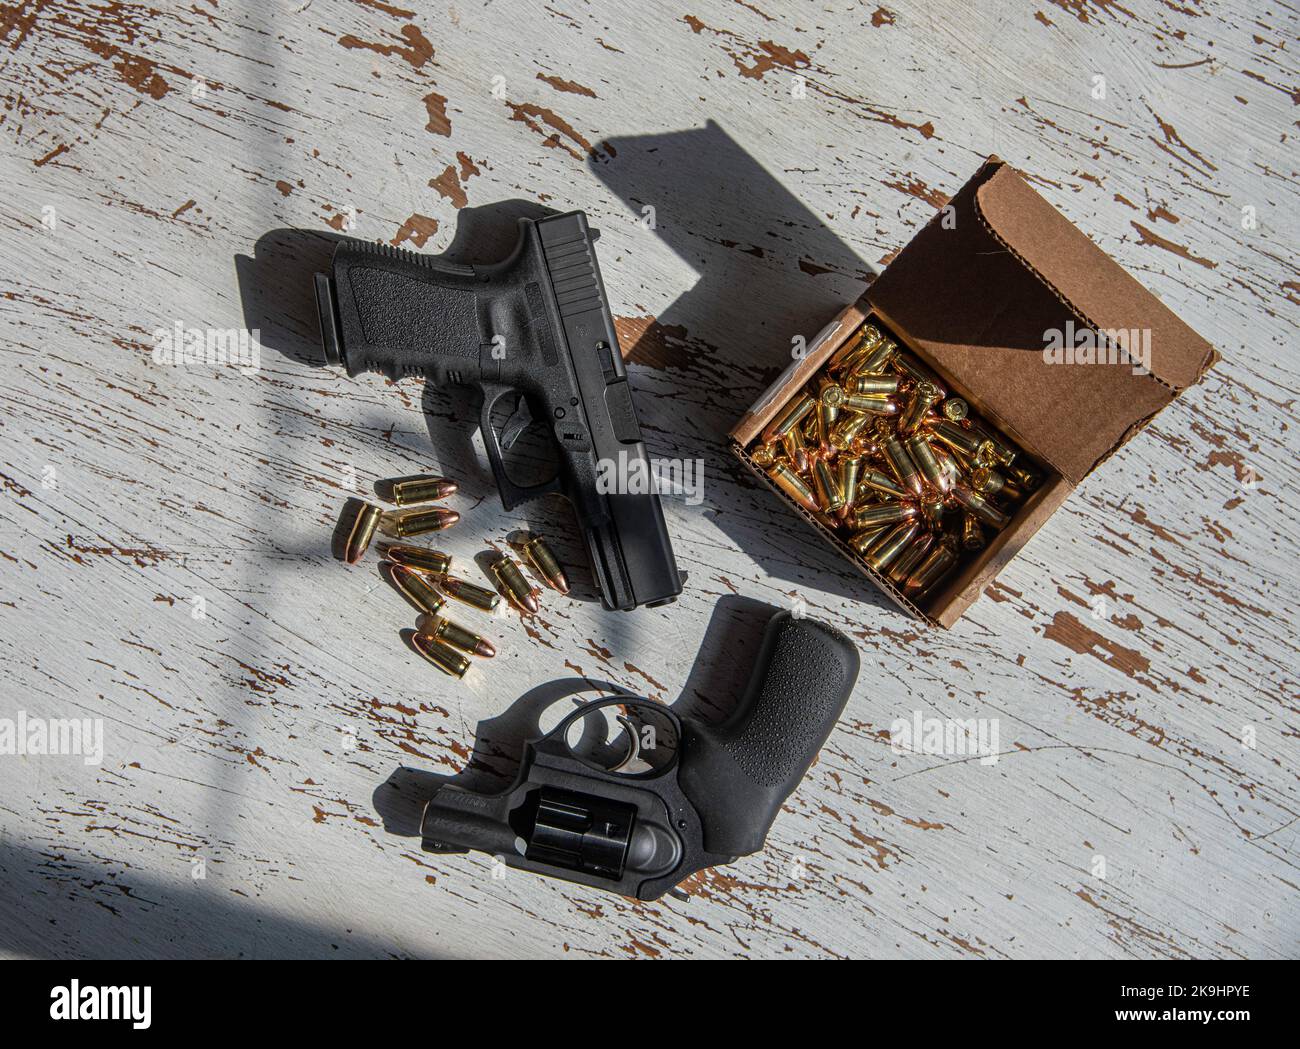 A 9mm Glock pistol and a Ruger 9mm revolver with a box of 9mm ammunition on a table. Stock Photo